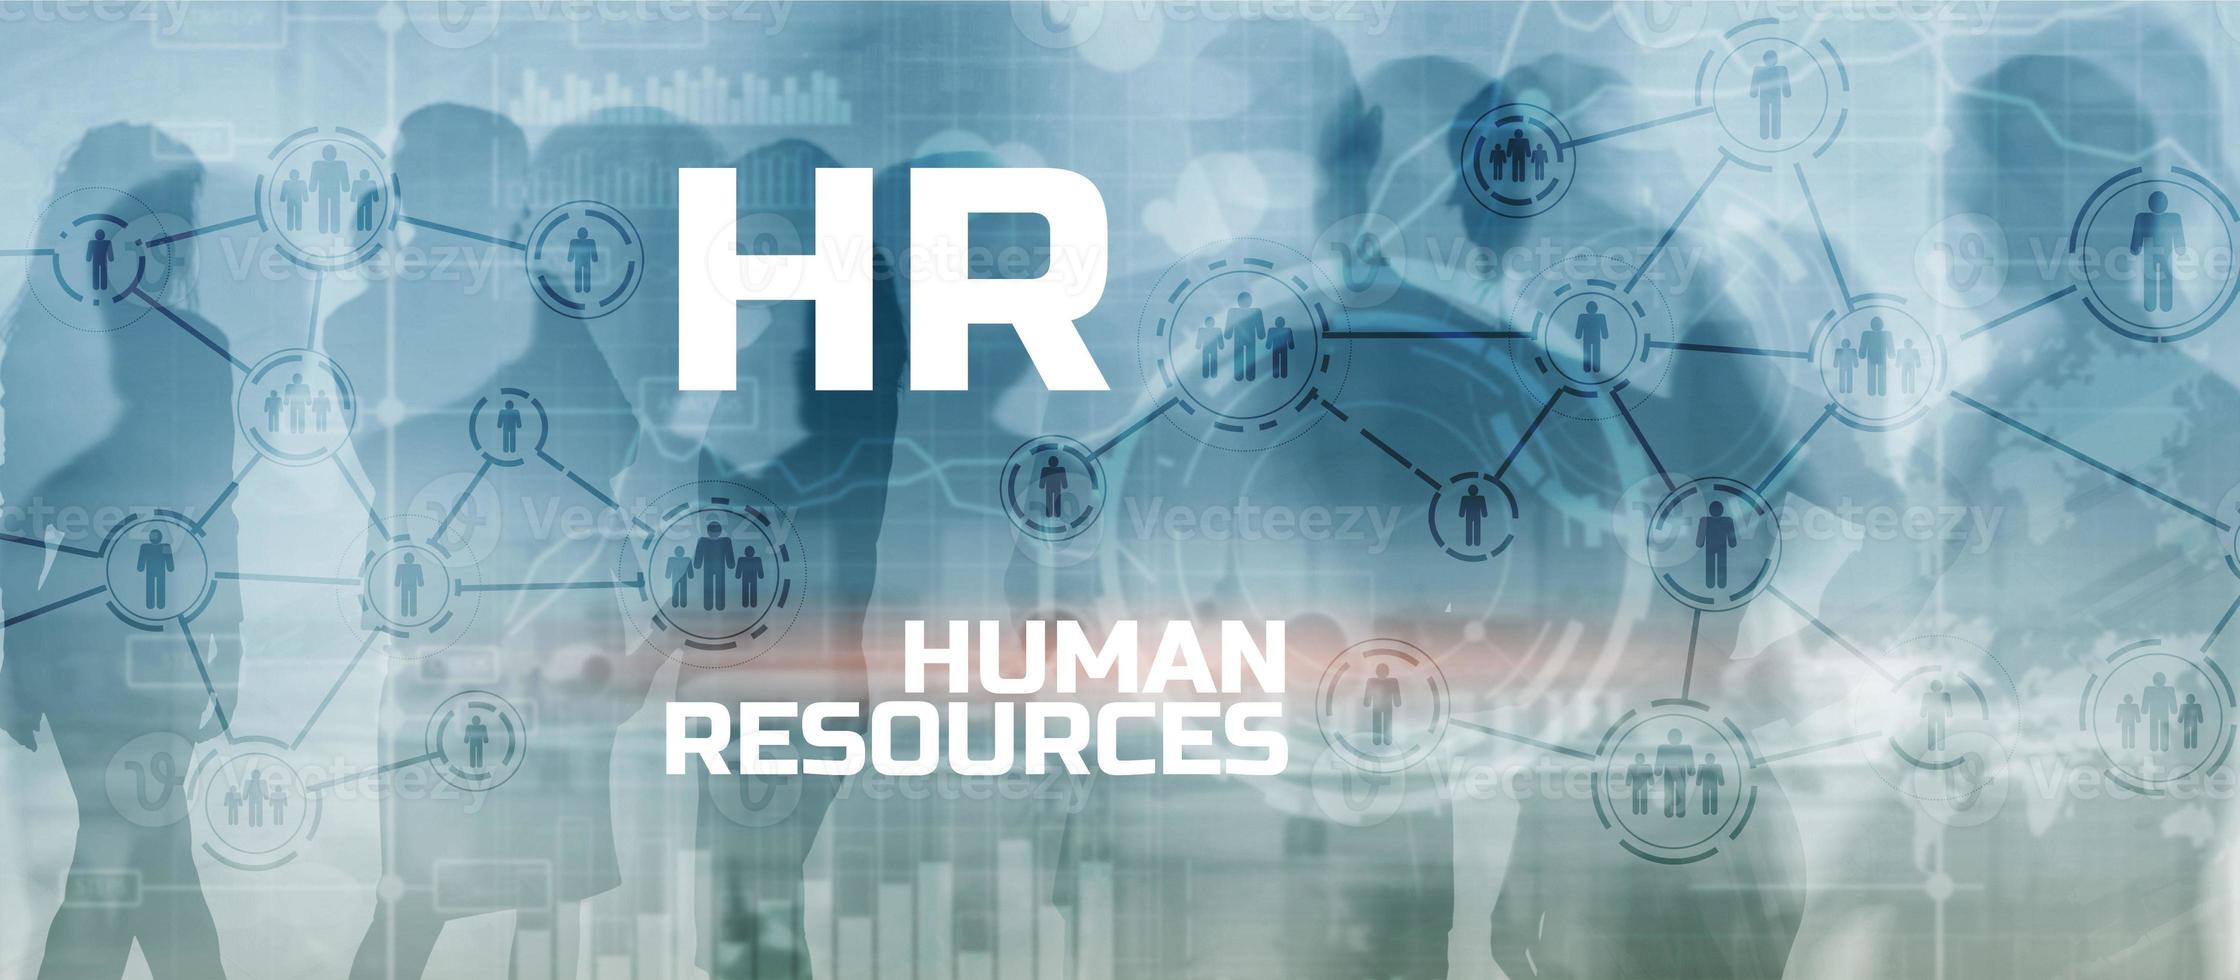 HR - Human resources management and recruitment concept. Double exposure people network mixed media structure photo